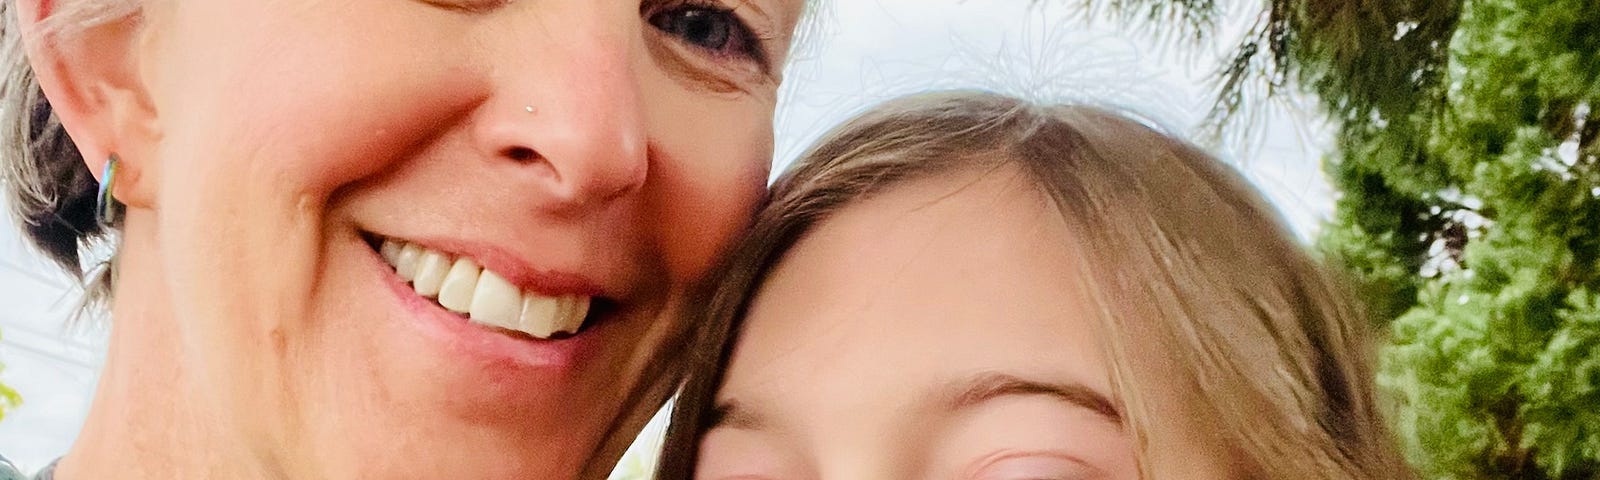 Photo of author and her daughter — both have blonde, medium-length hair and are smiling, daughter is 12 and sticking out her tongue playfully.